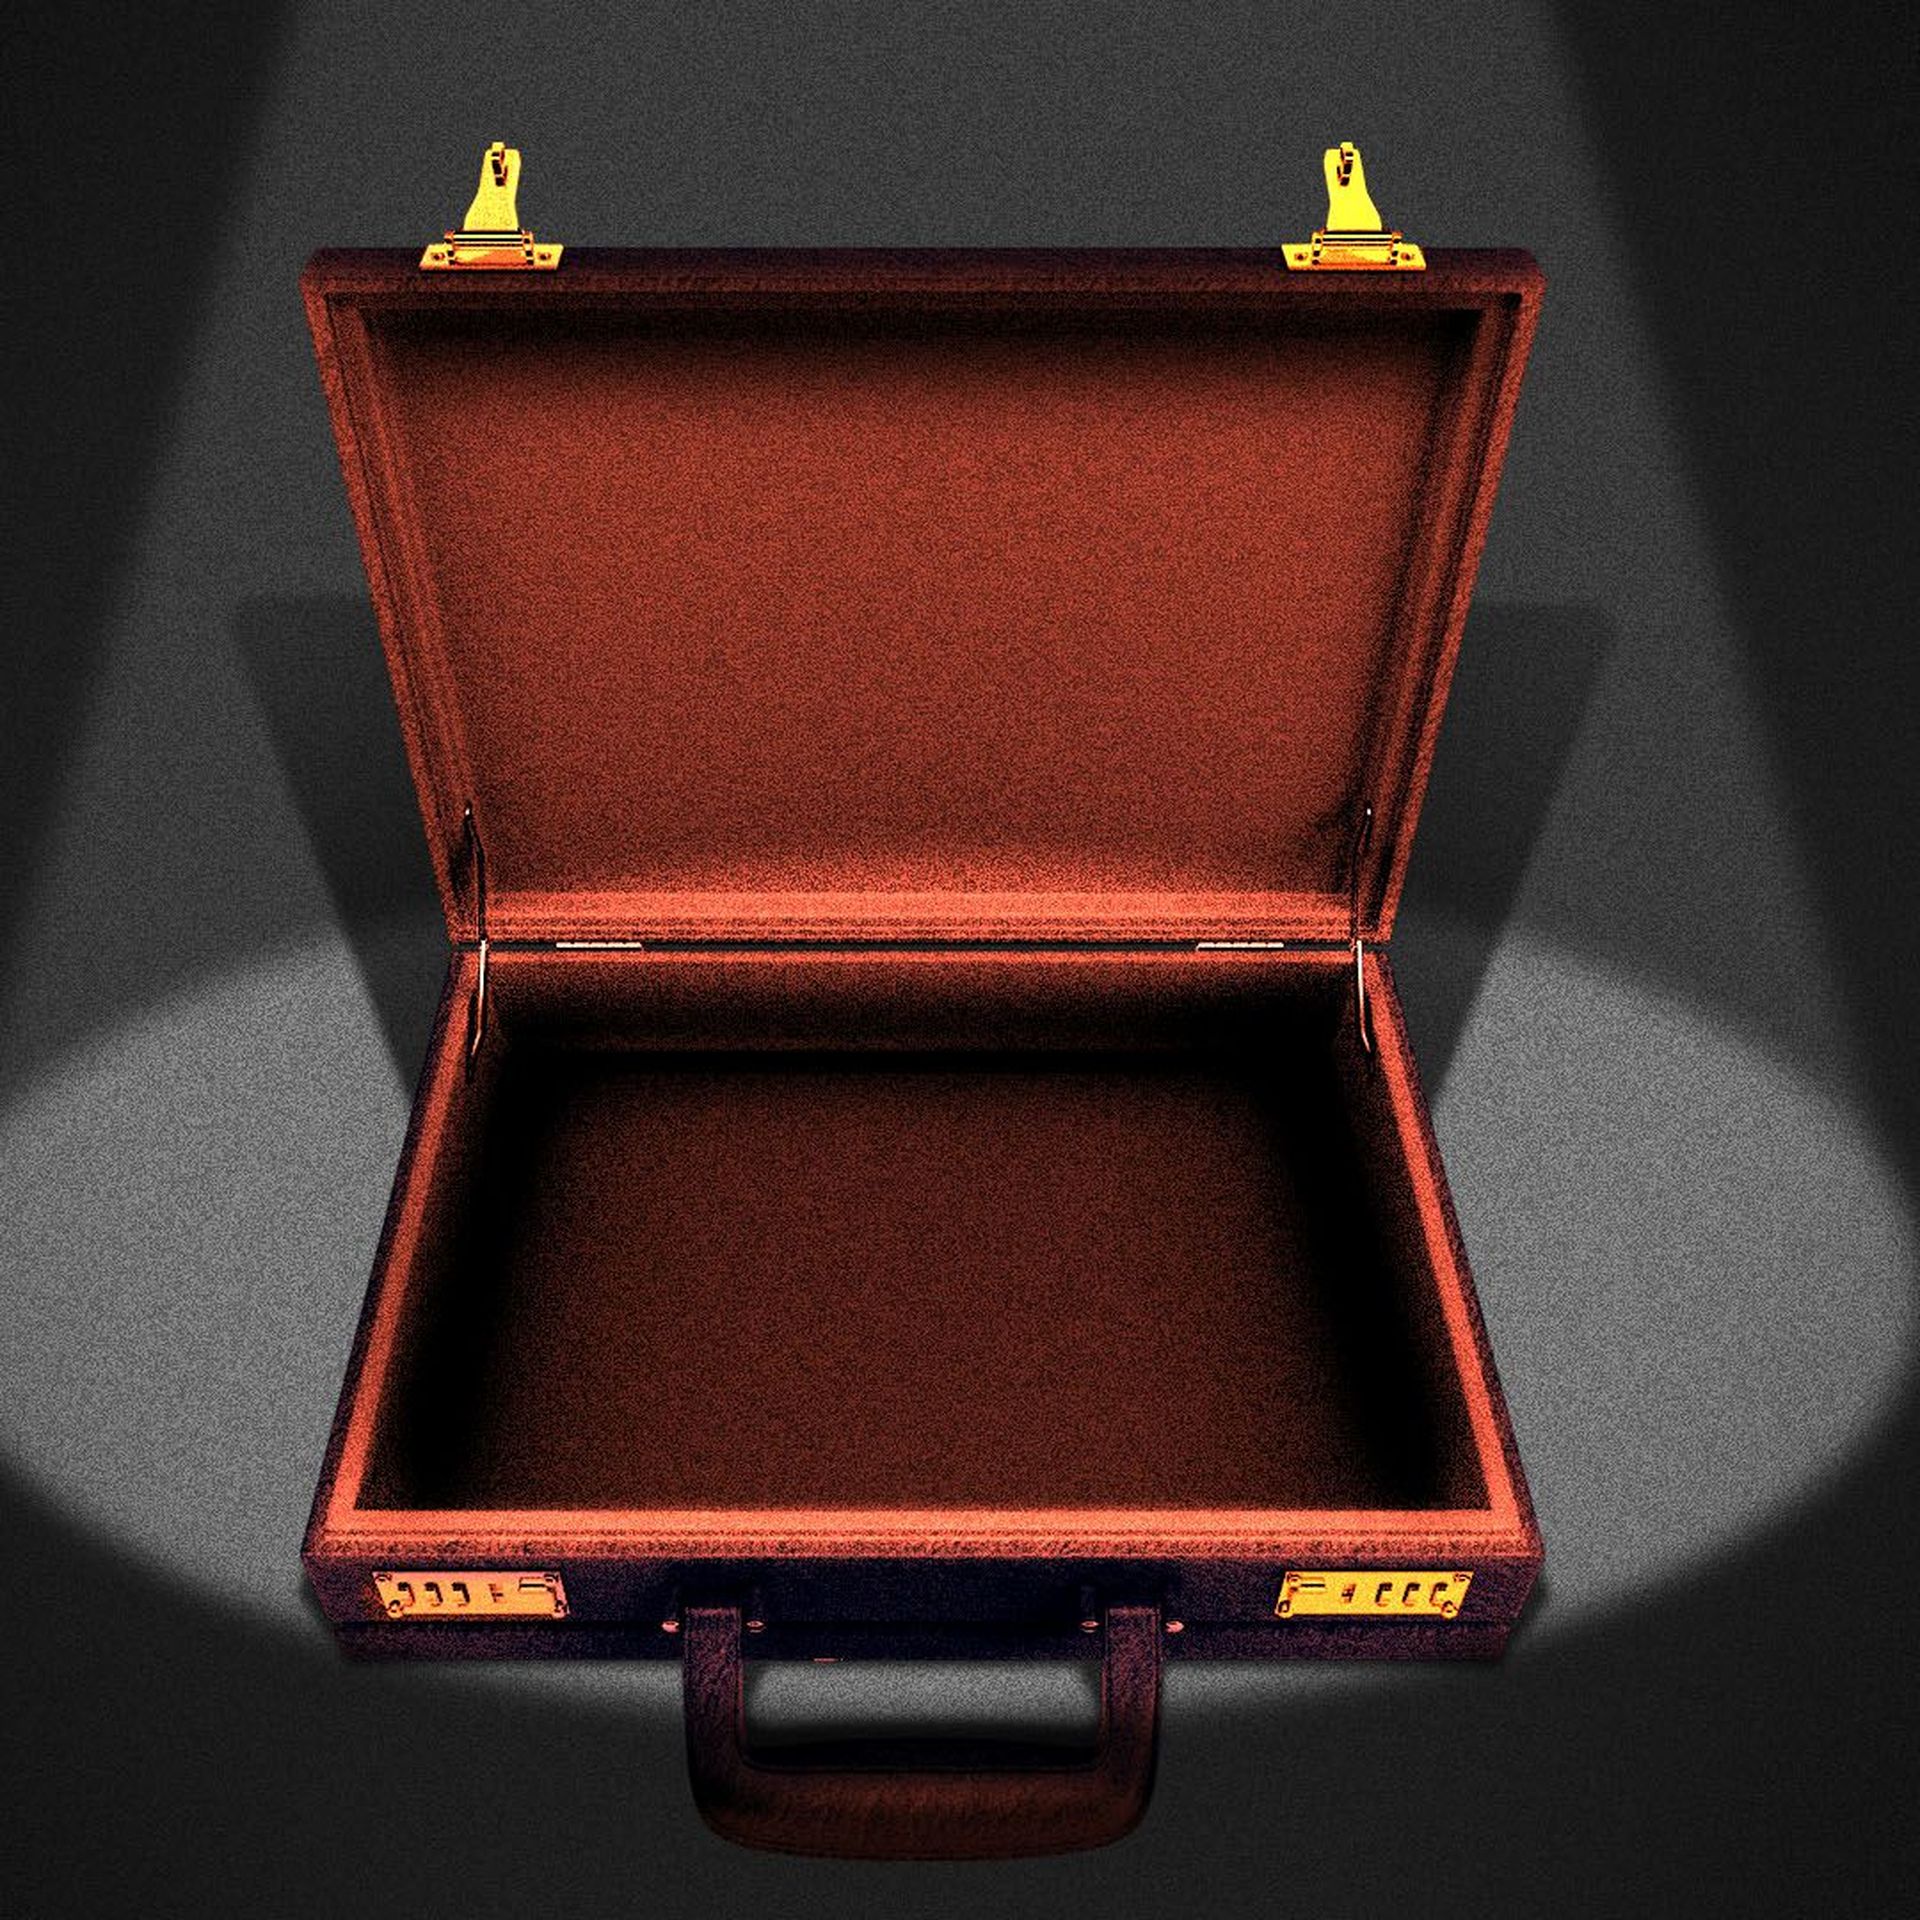 Illustration of an open briefcase with a spotlight on it